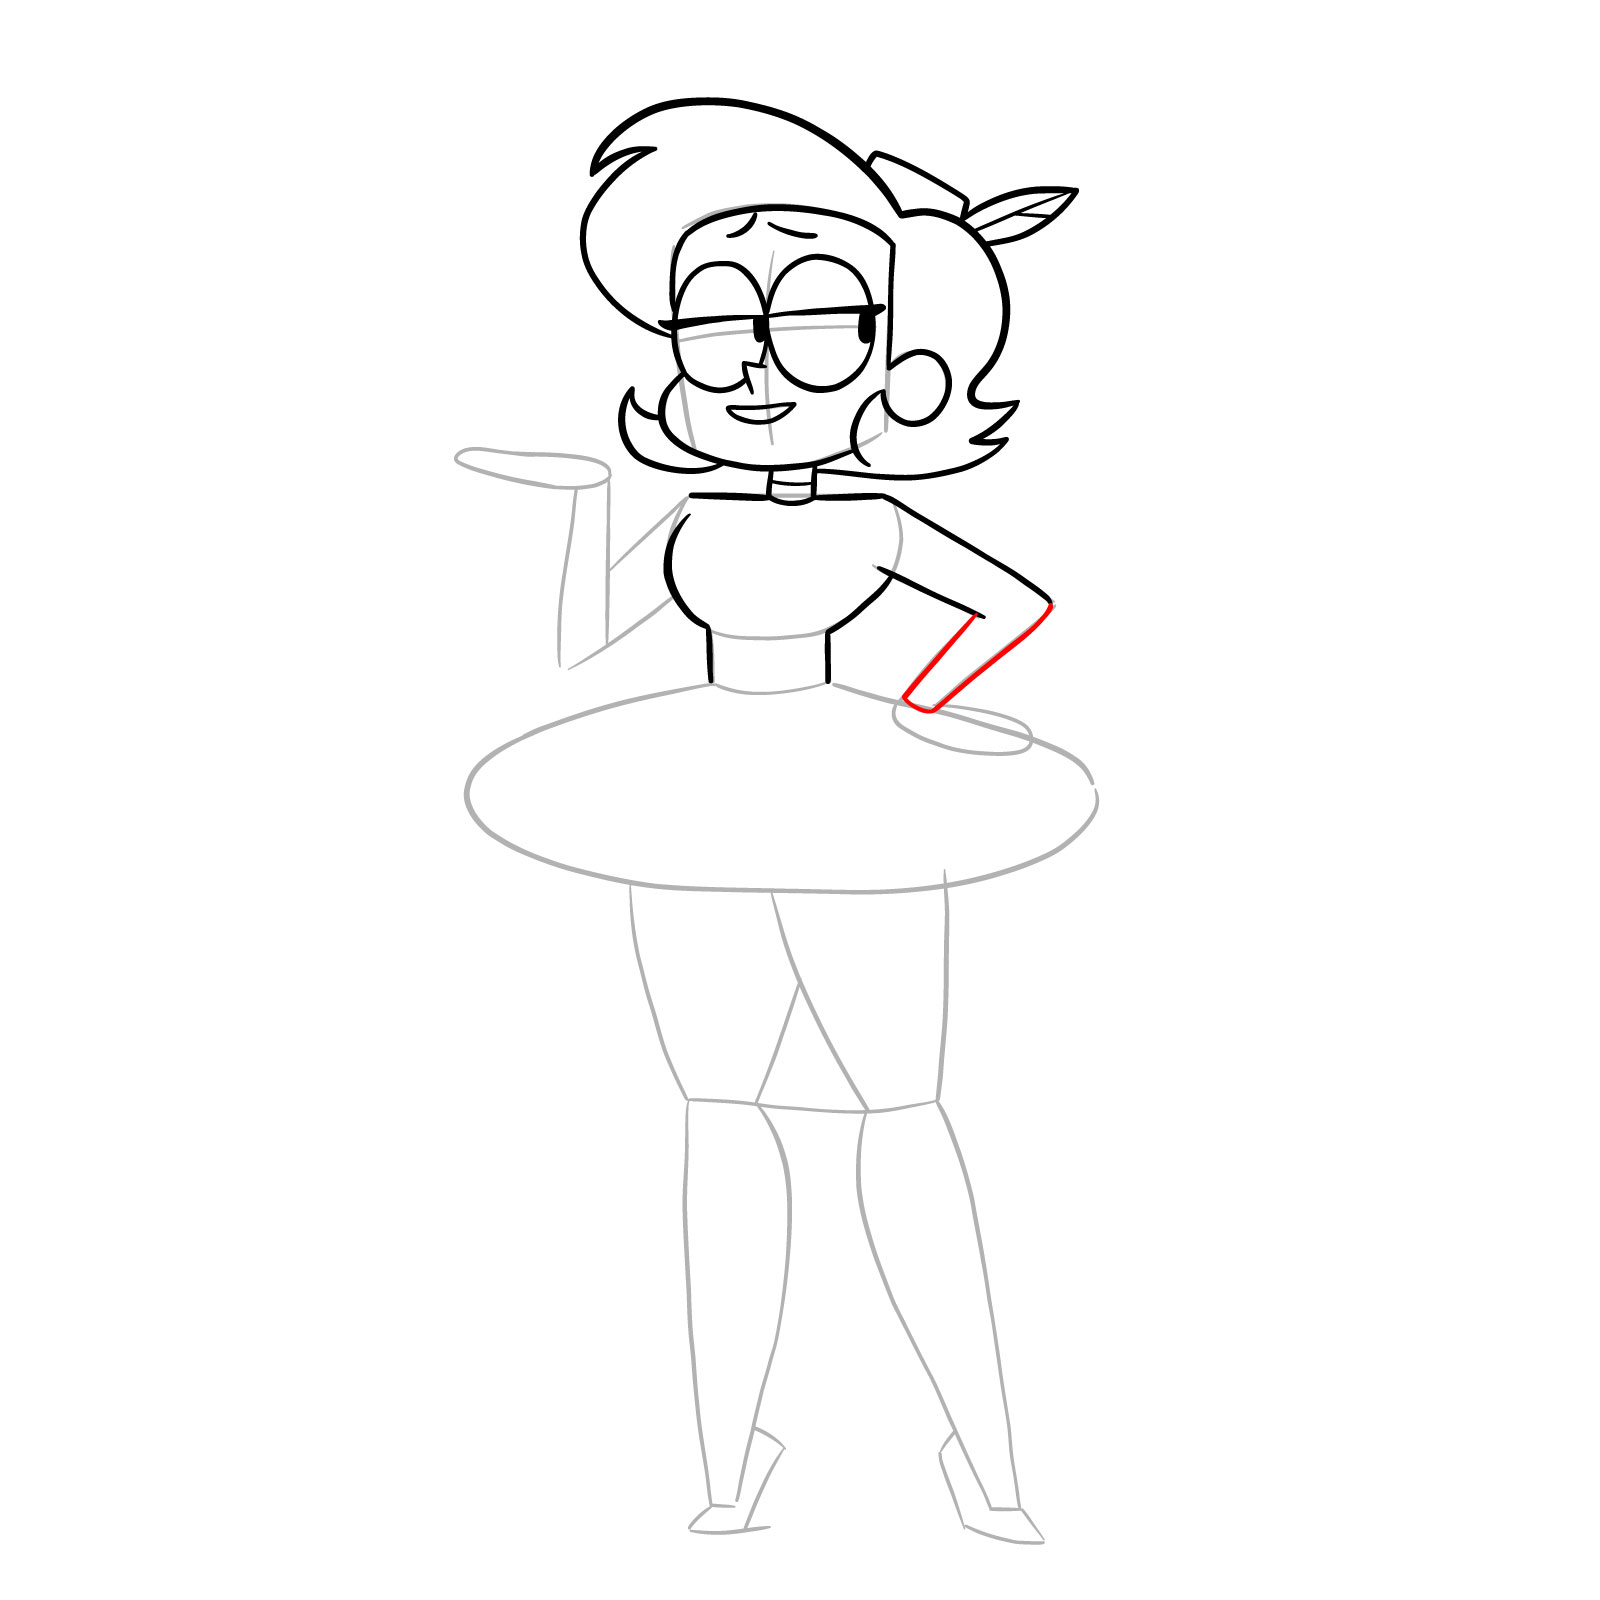 How to draw Elodie from OK K.O.! - step 18